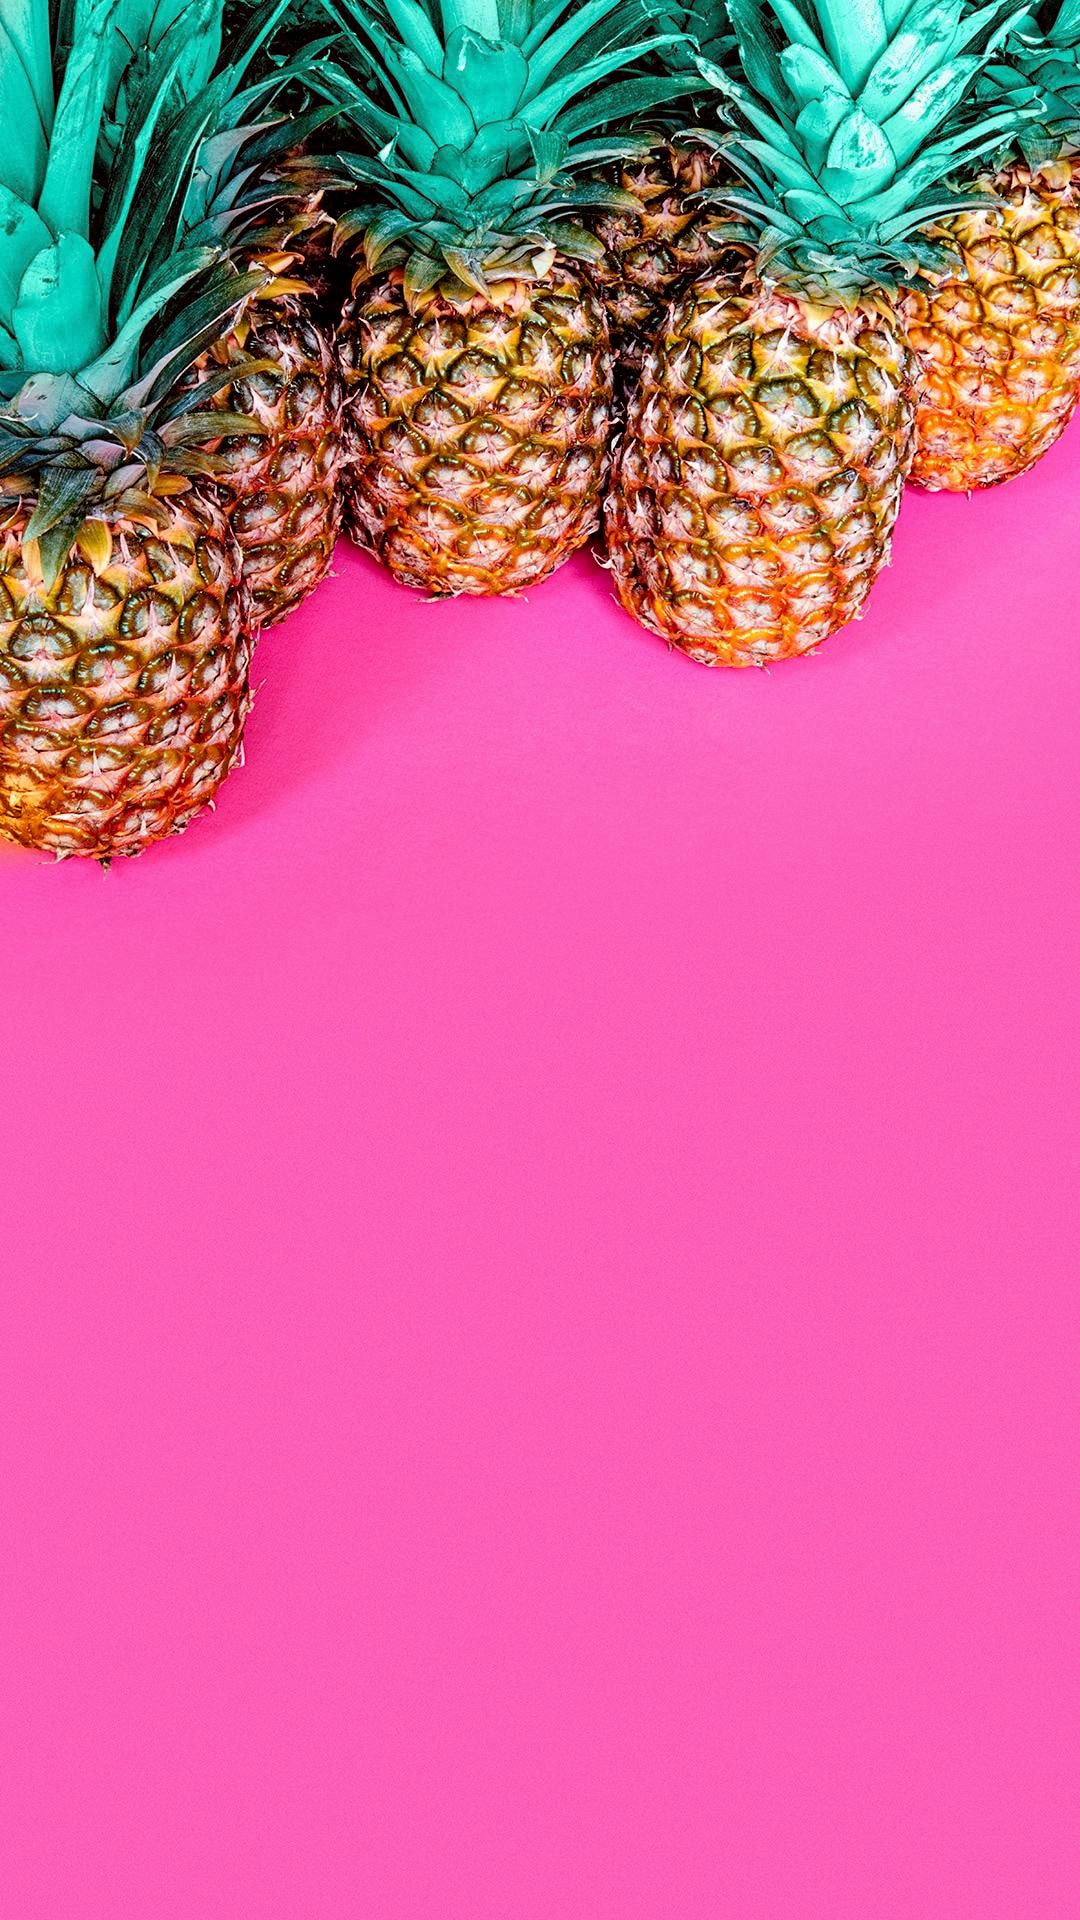 Pineapple iPhone Wallpaper with high-resolution 1080x1920 pixel. You can use this wallpaper for your iPhone 5, 6, 7, 8, X, XS, XR backgrounds, Mobile Screensaver, or iPad Lock Screen - Food